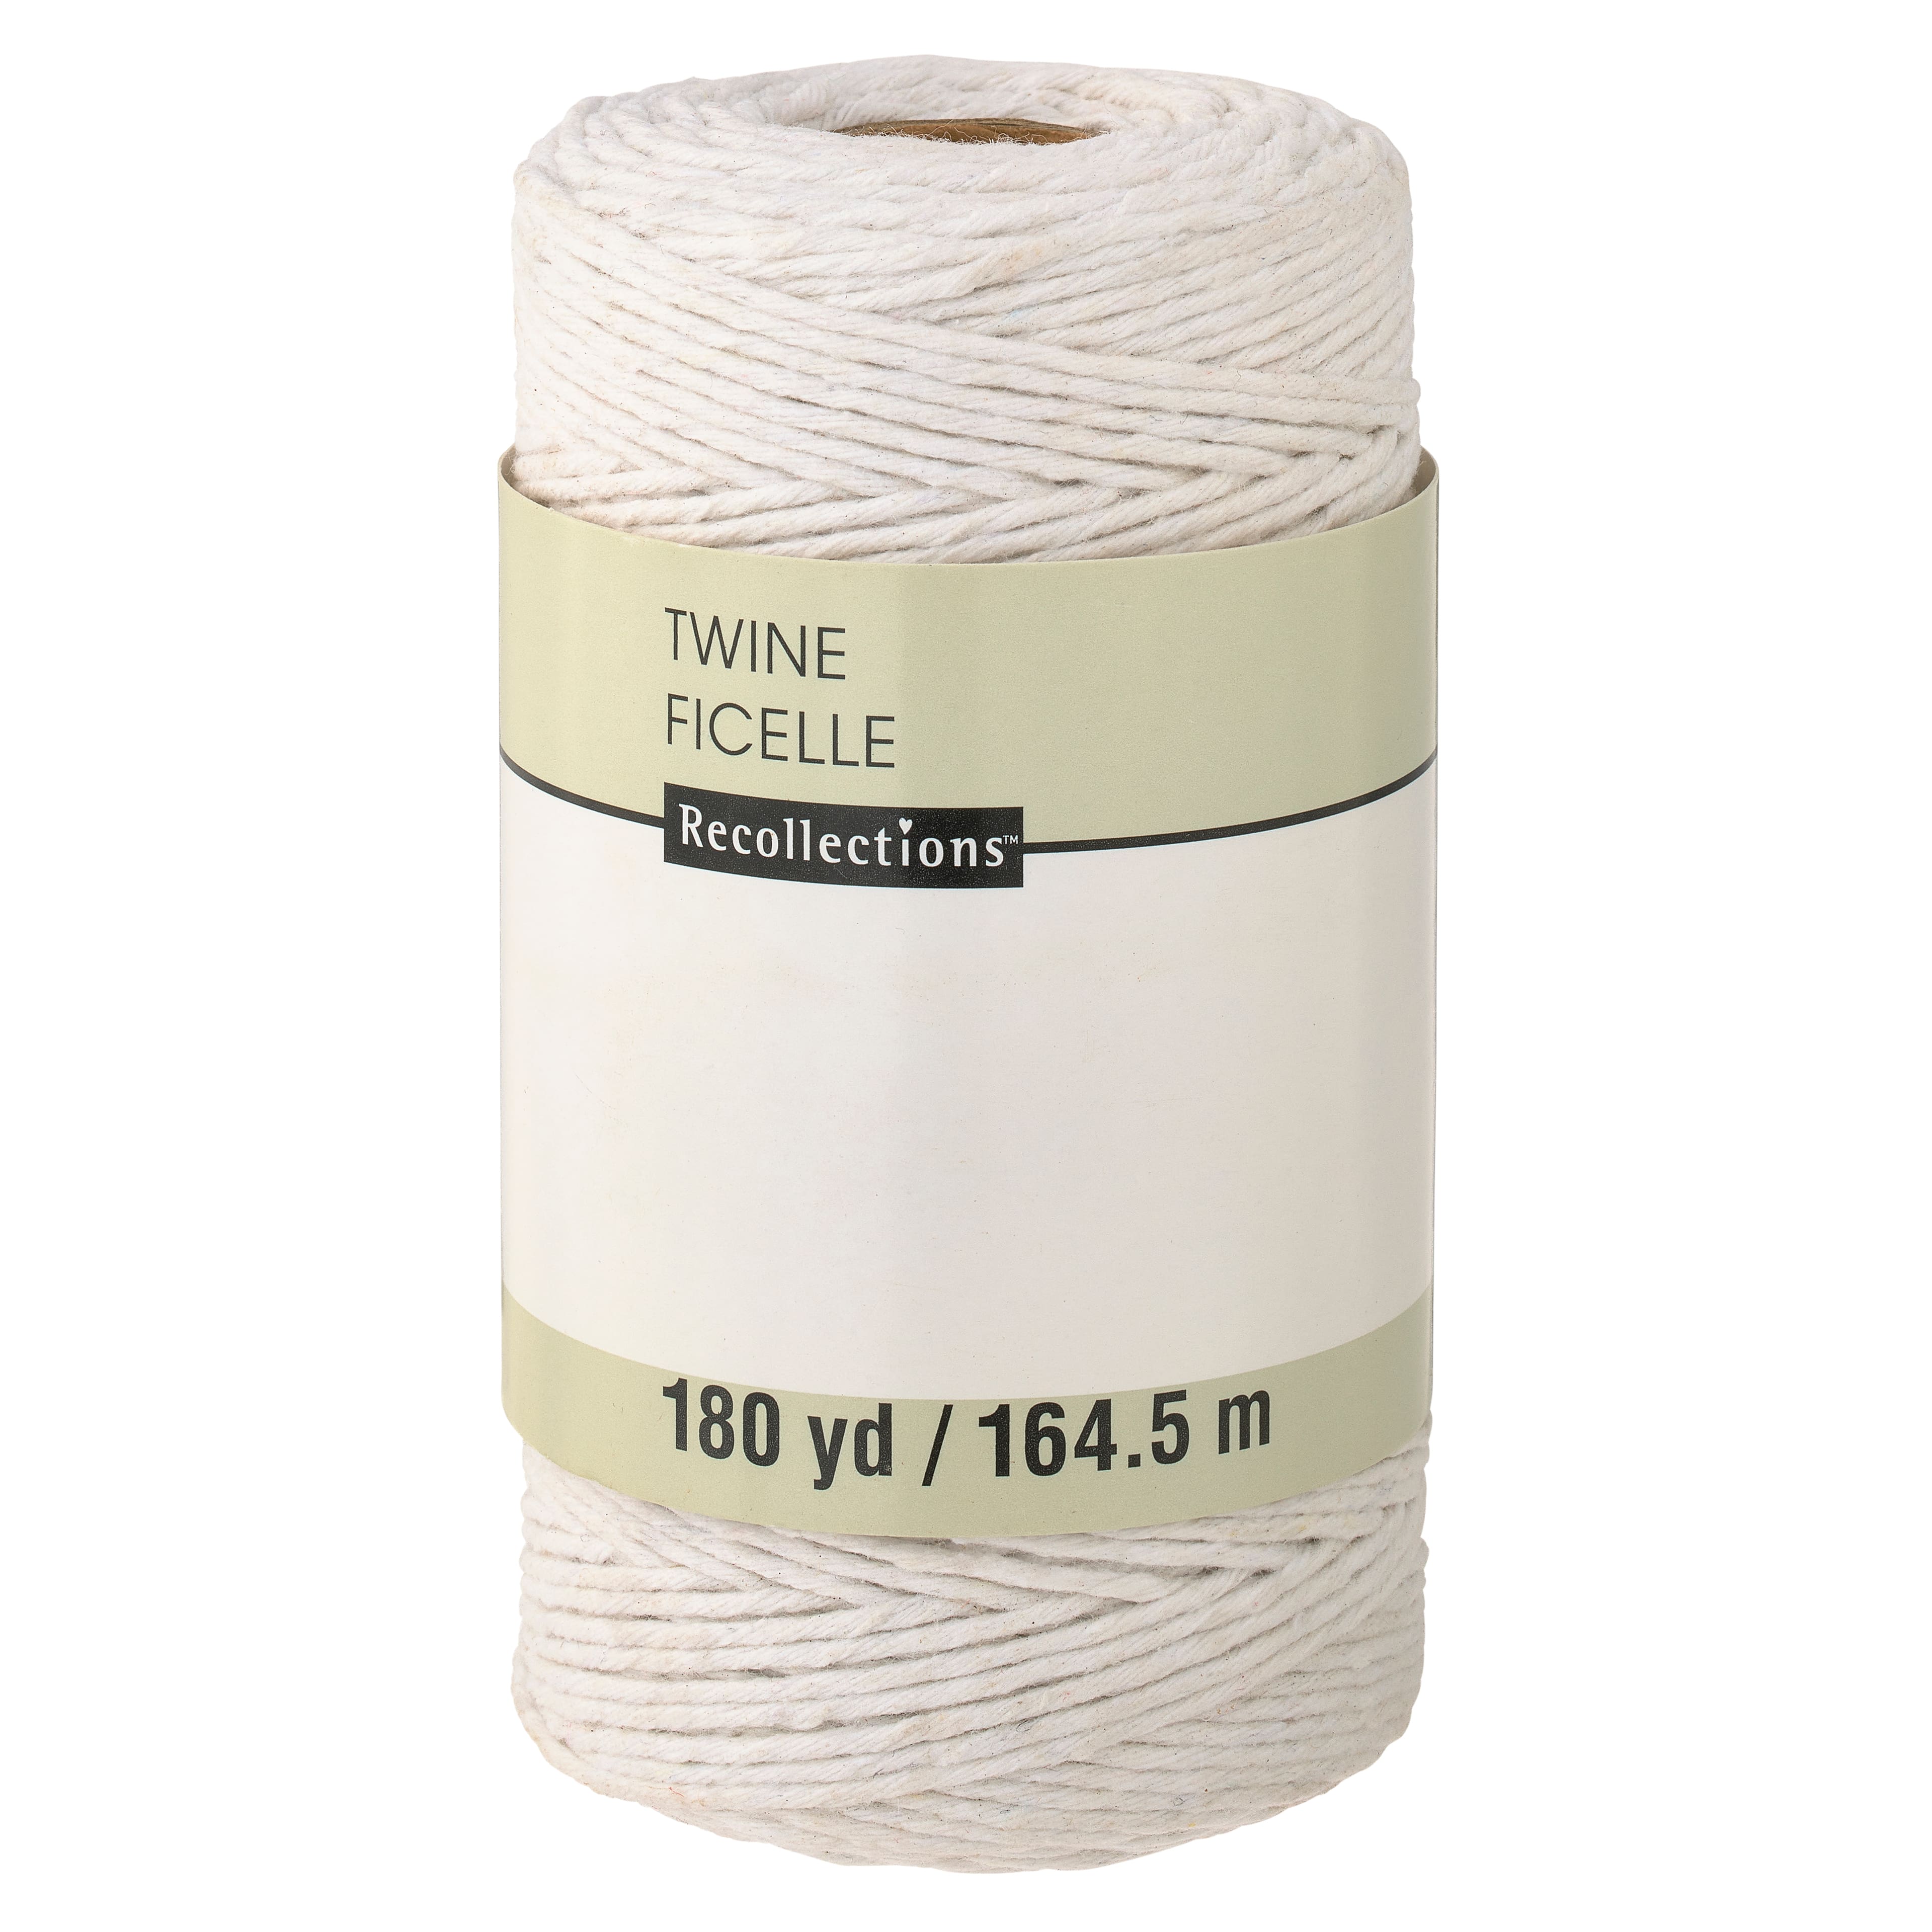 Find the White Twine Spool by Recollections™ at Michaels